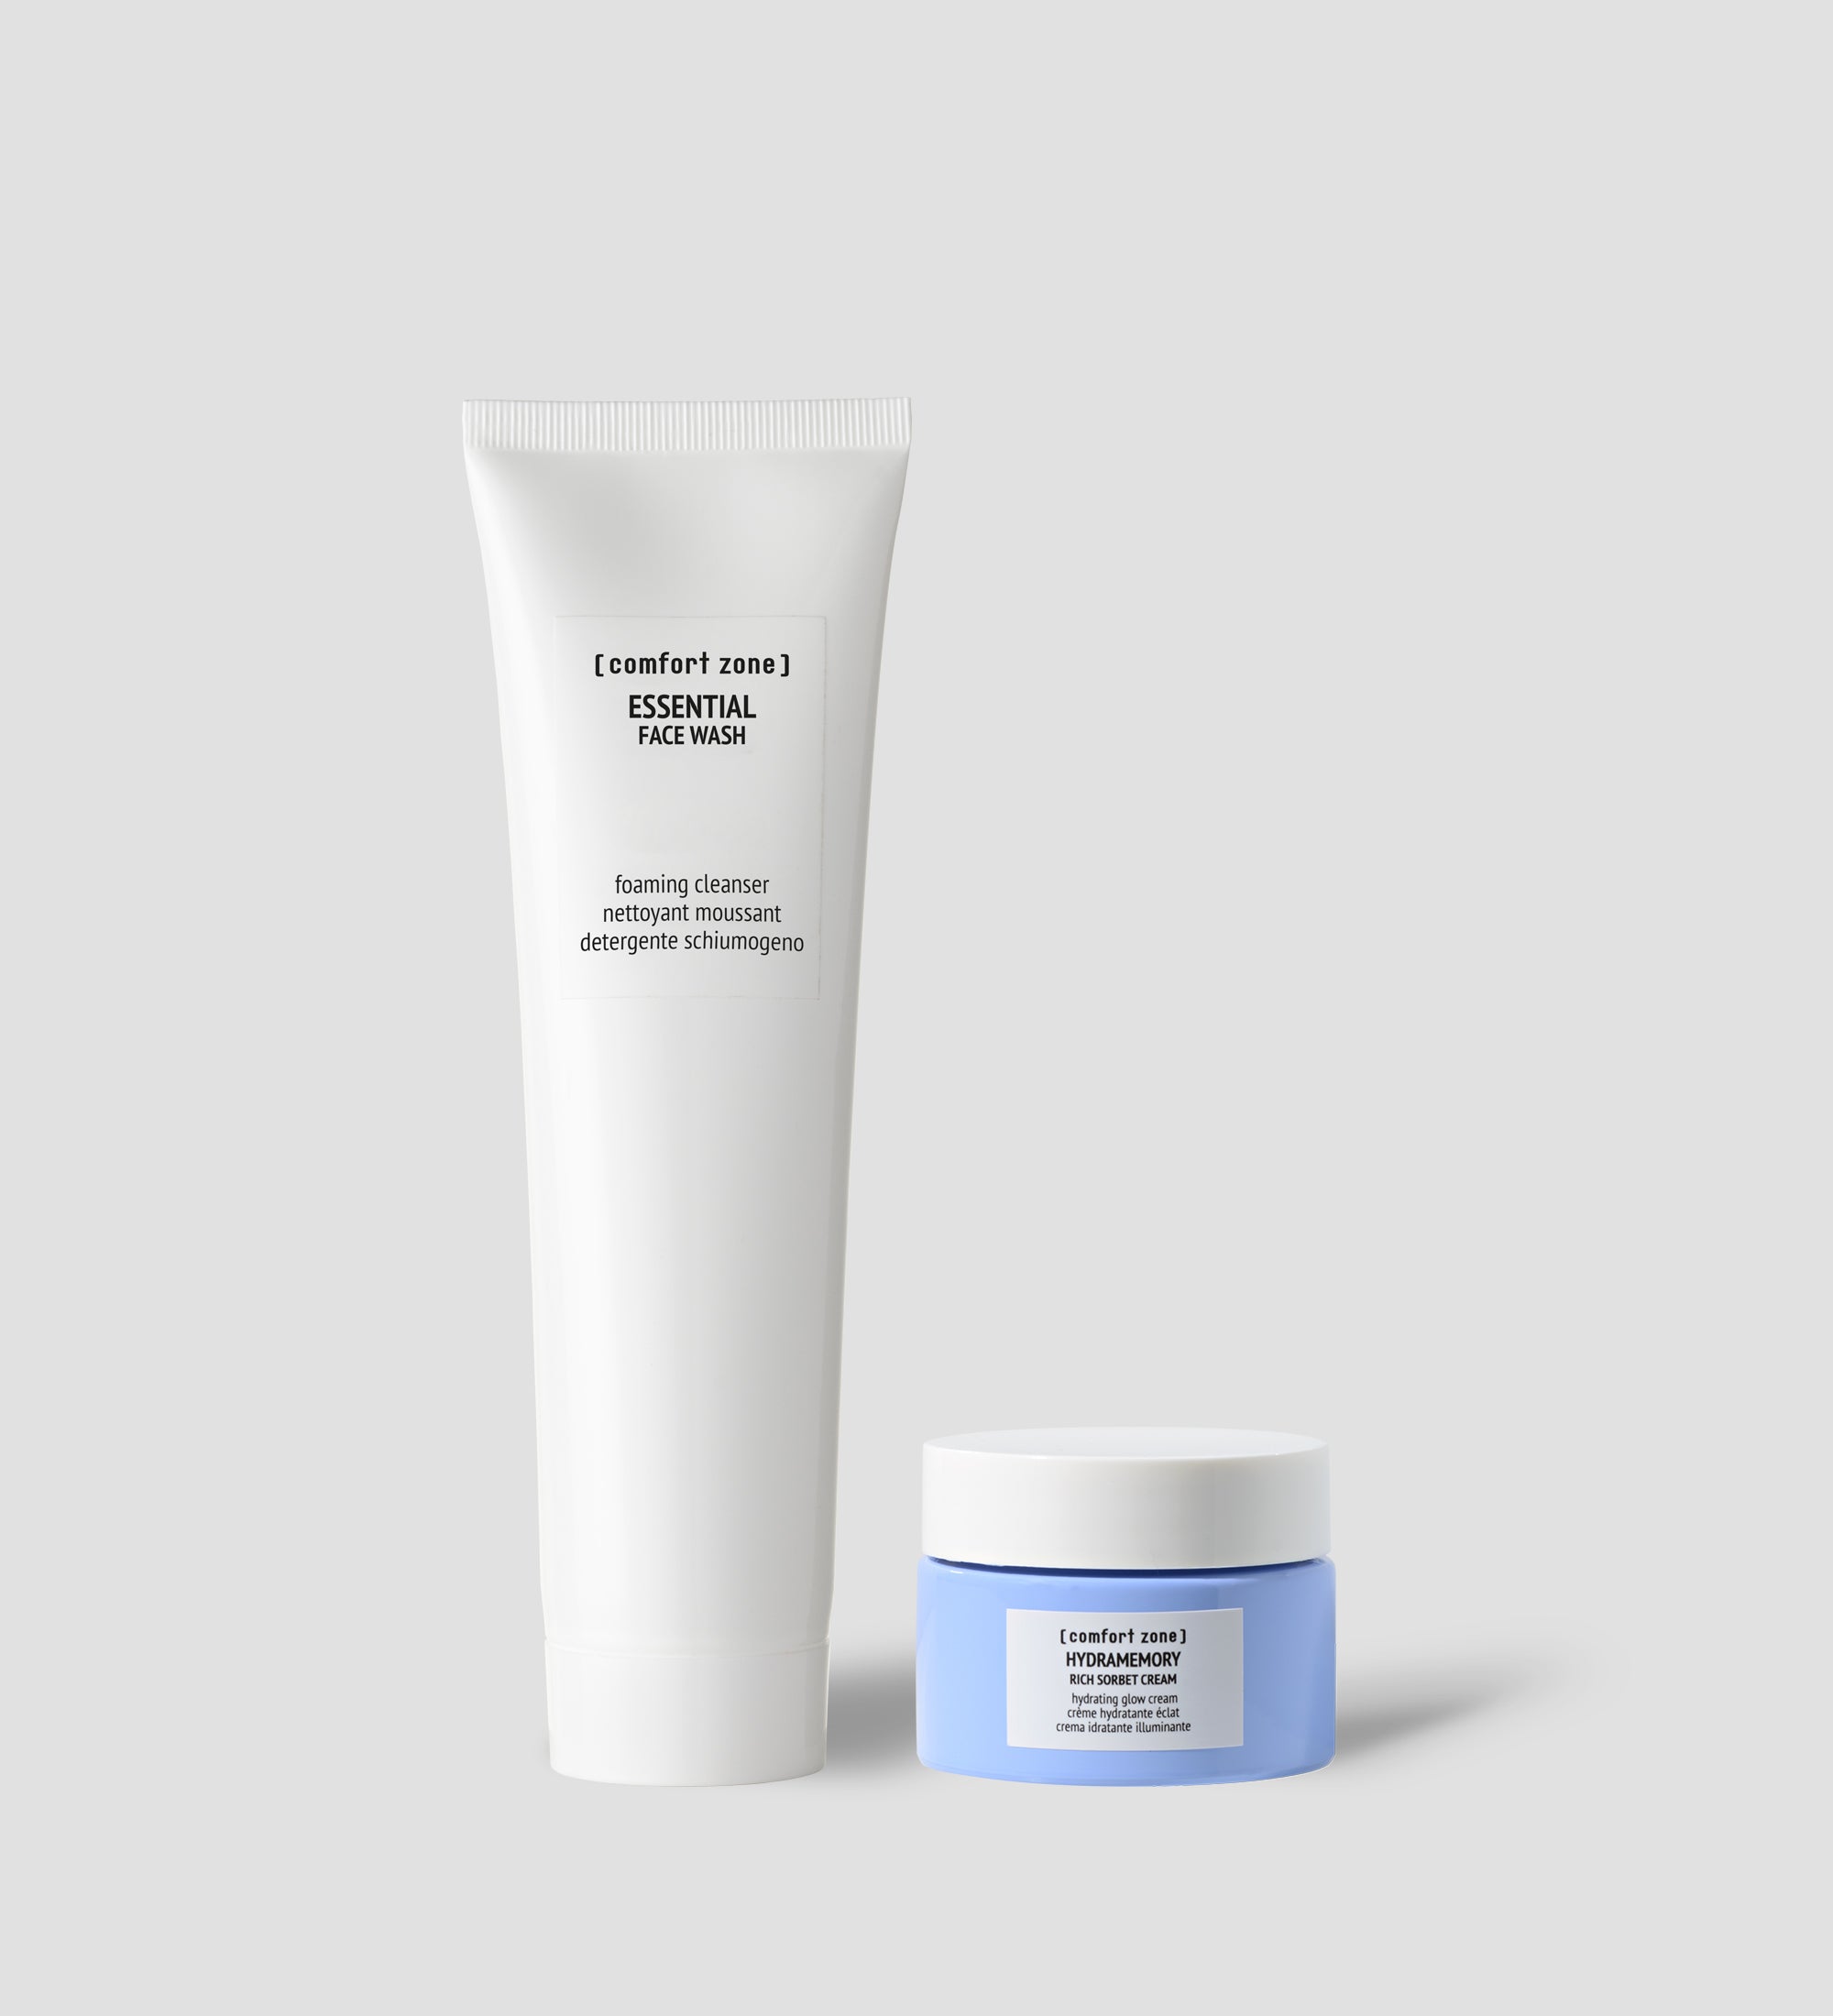 Comfort Zone: SET CLEANSE &amp; HYDRATE DUO Skincare routine giornaliera -
